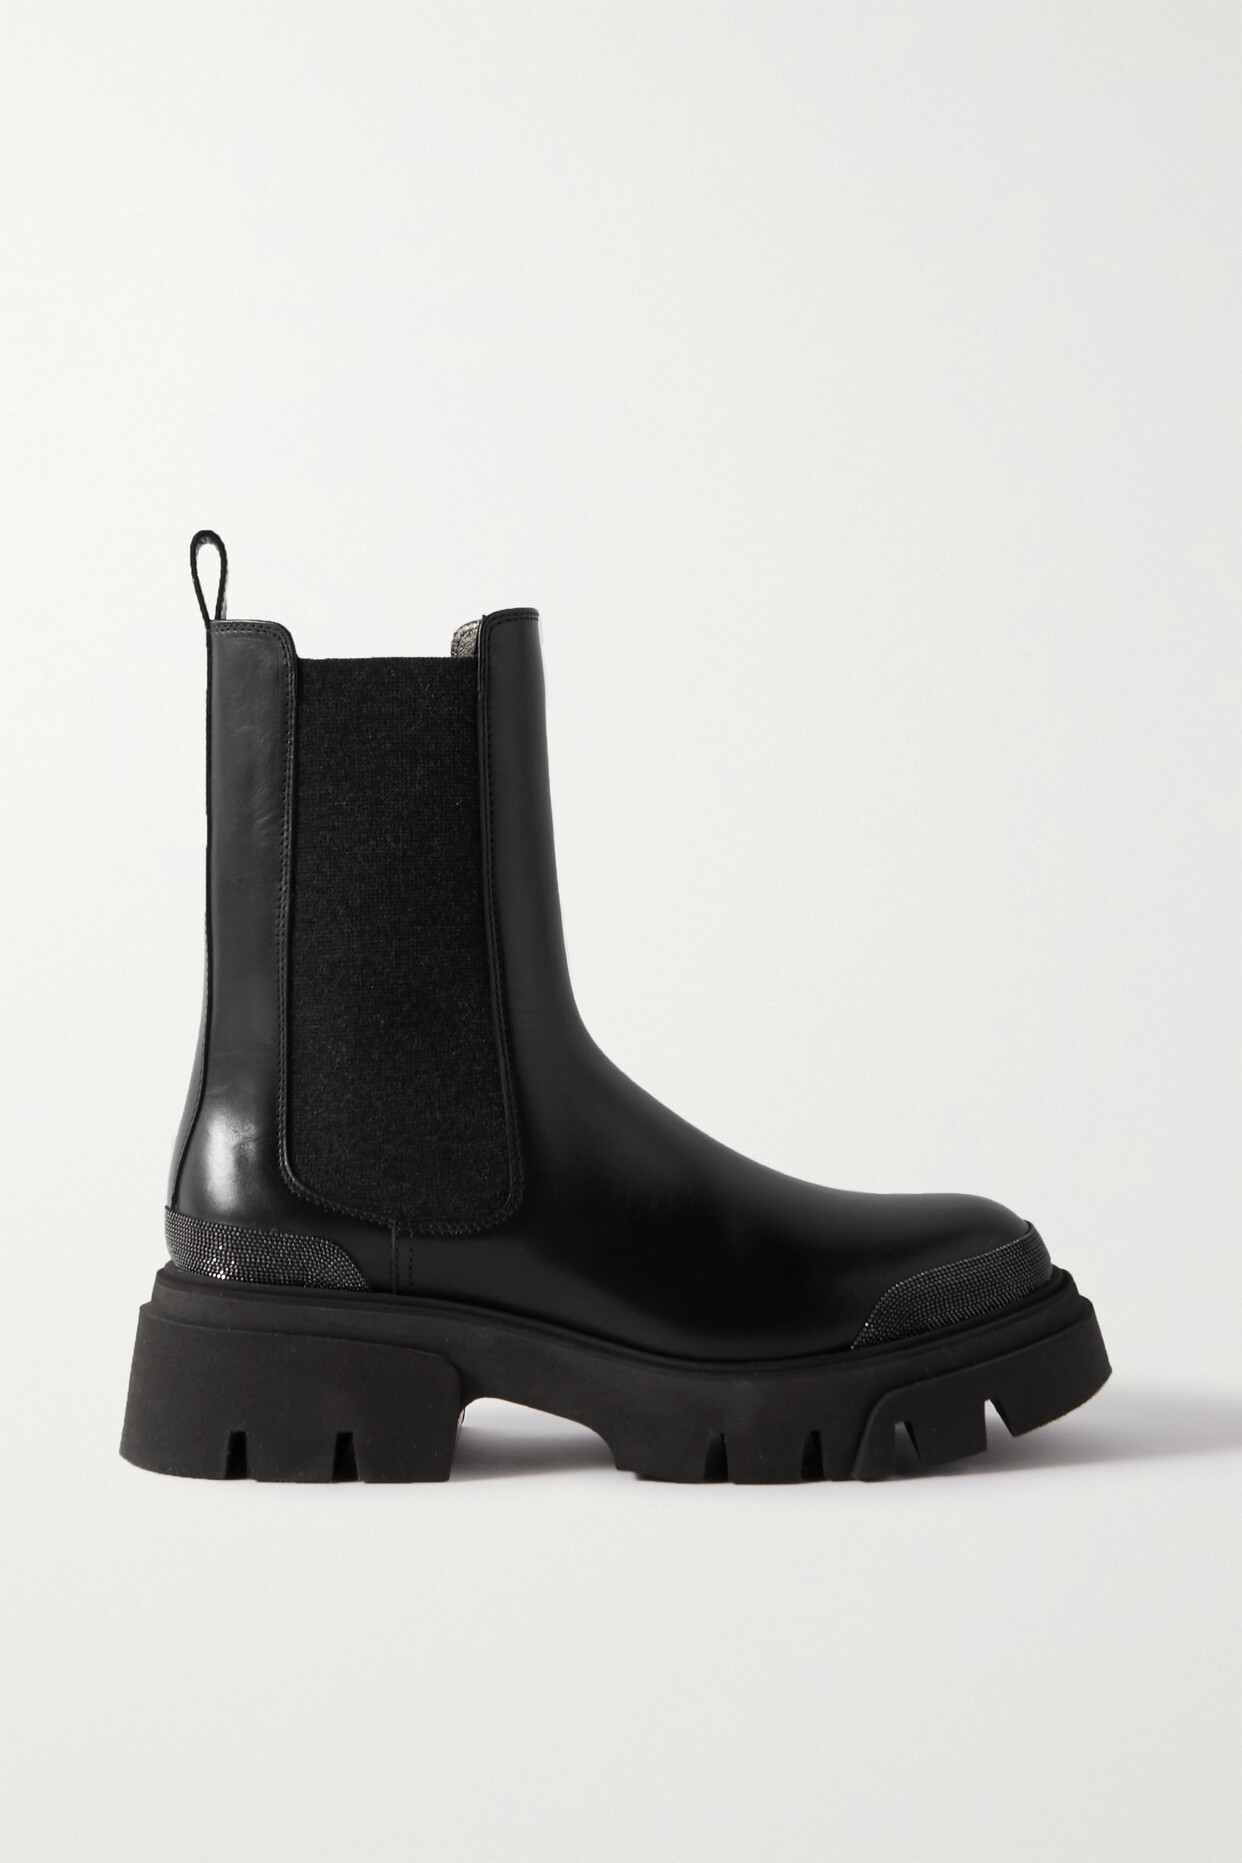 Brunello Cucinelli - Bead-embellished Leather Chelsea Boots - Black